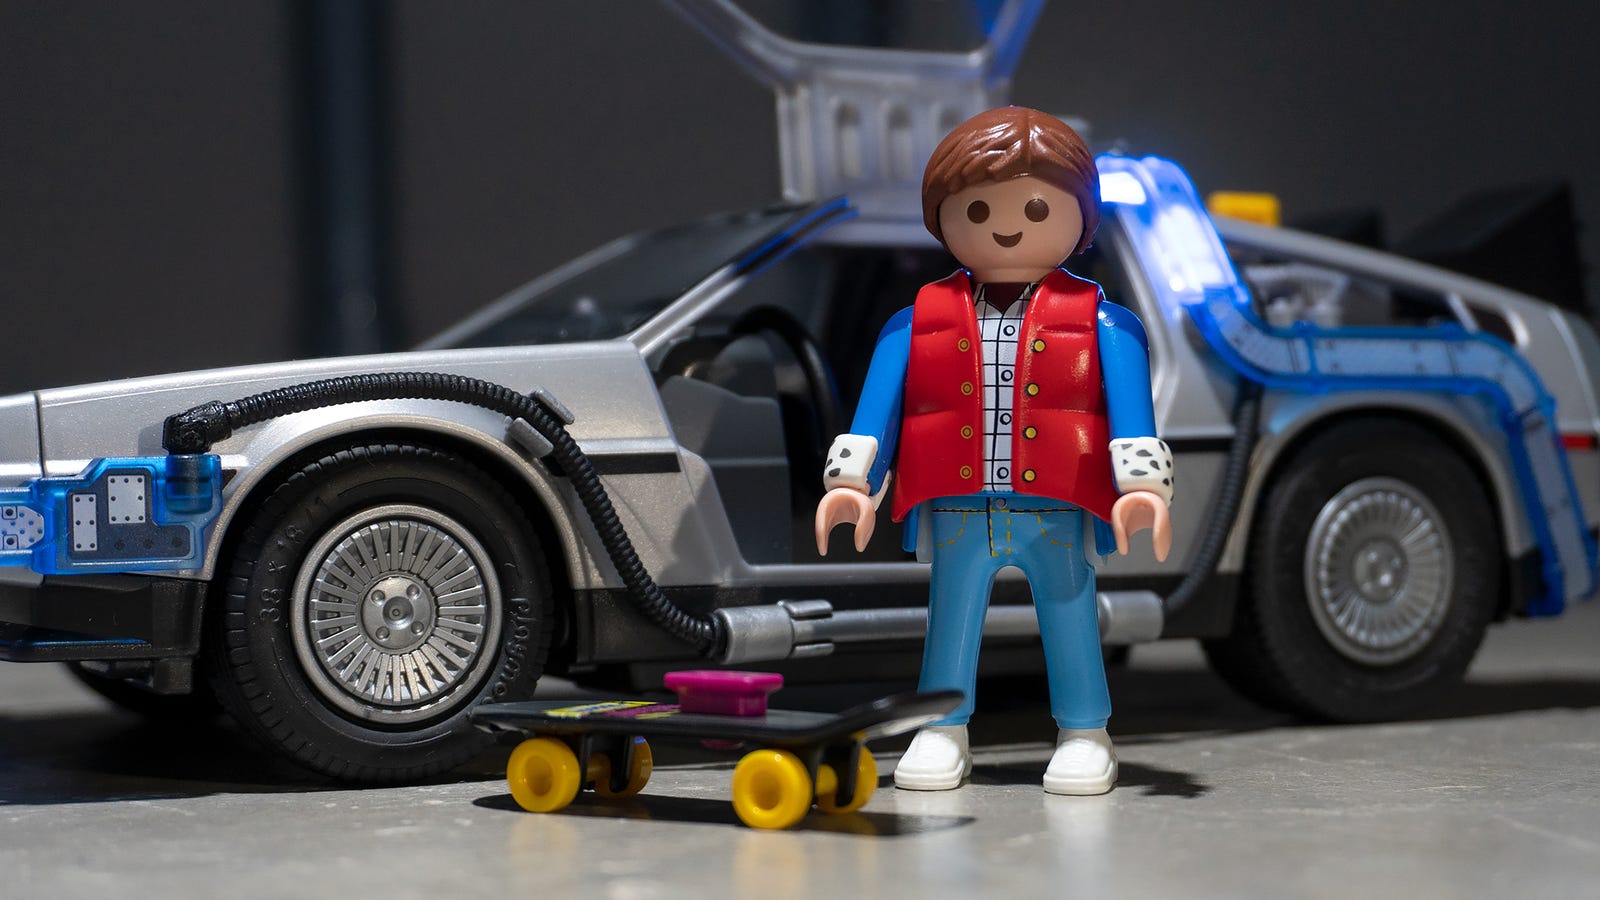 Playmobil’s Marty McFly sports his 1985 costume from the film and includes his present-day skateboard. But we would have really liked to see his hoverboard from 2015 included as well.